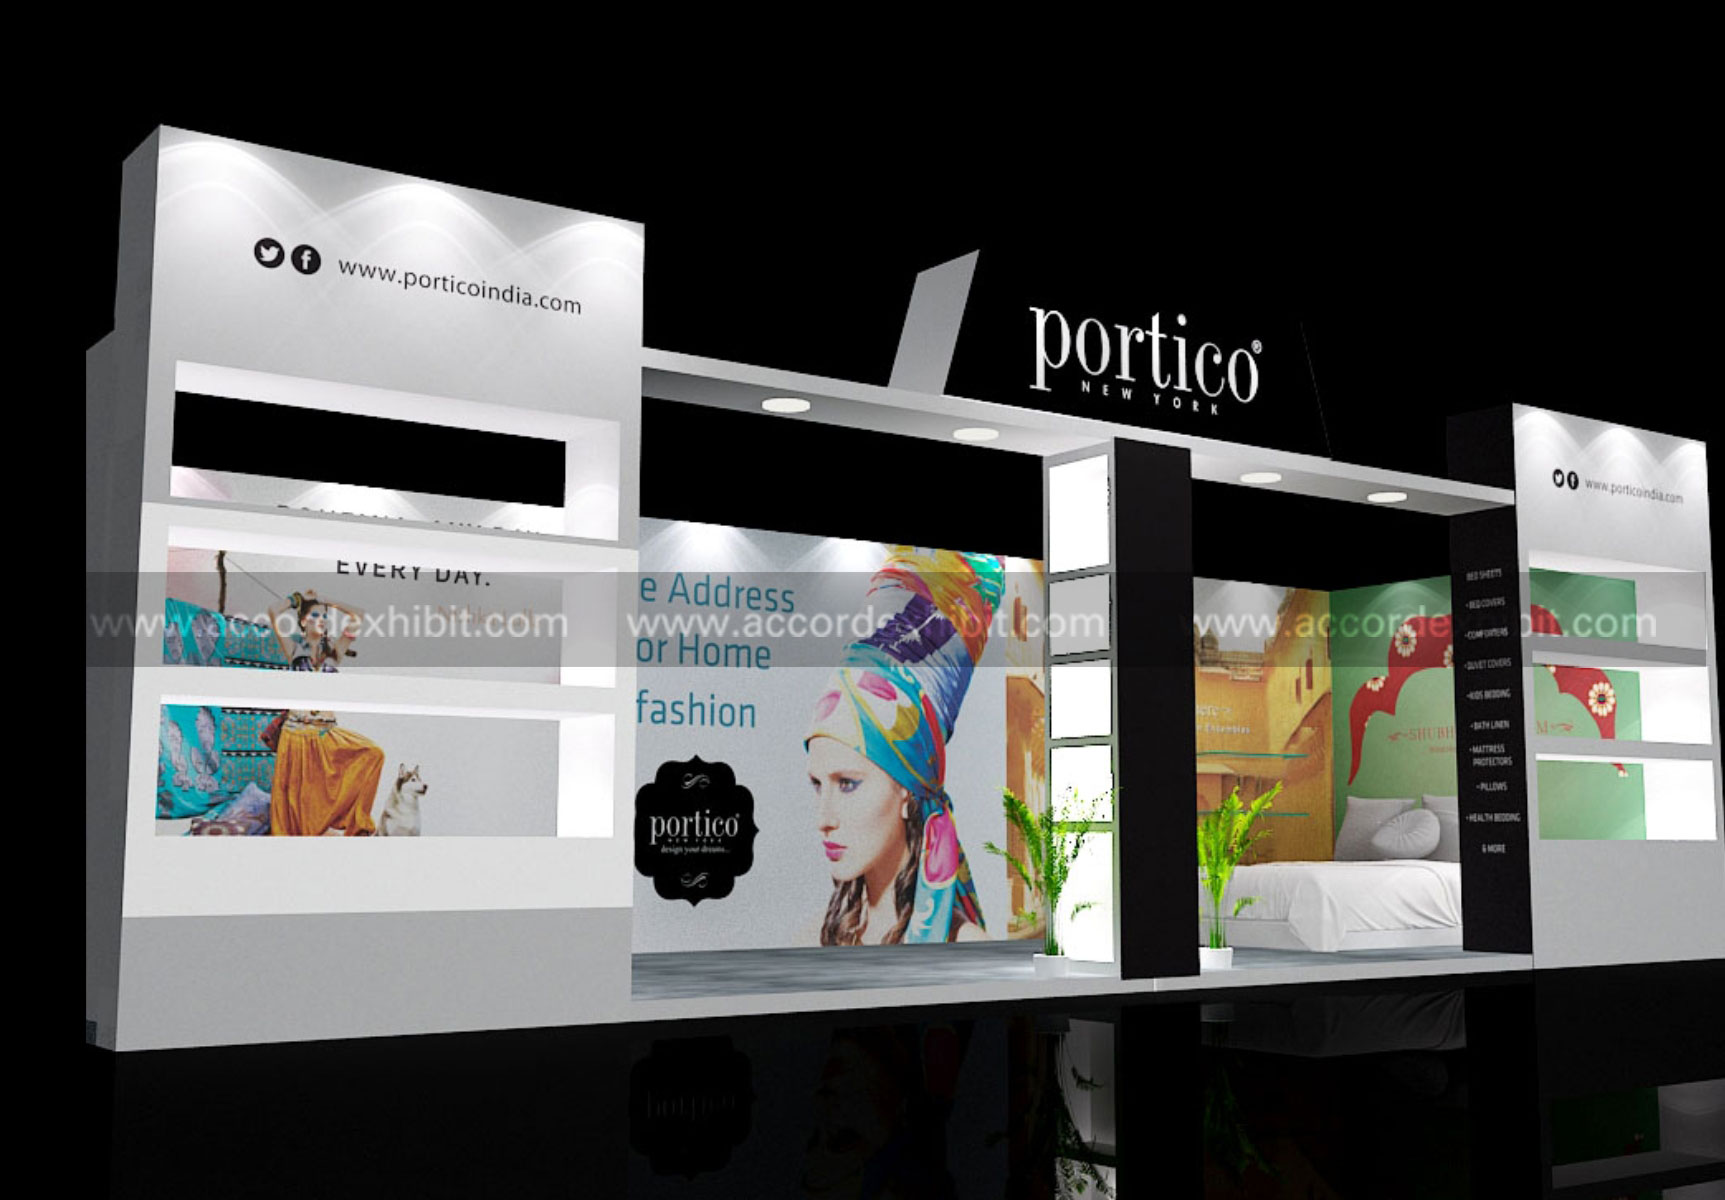 Exhibition Stall for Potico India